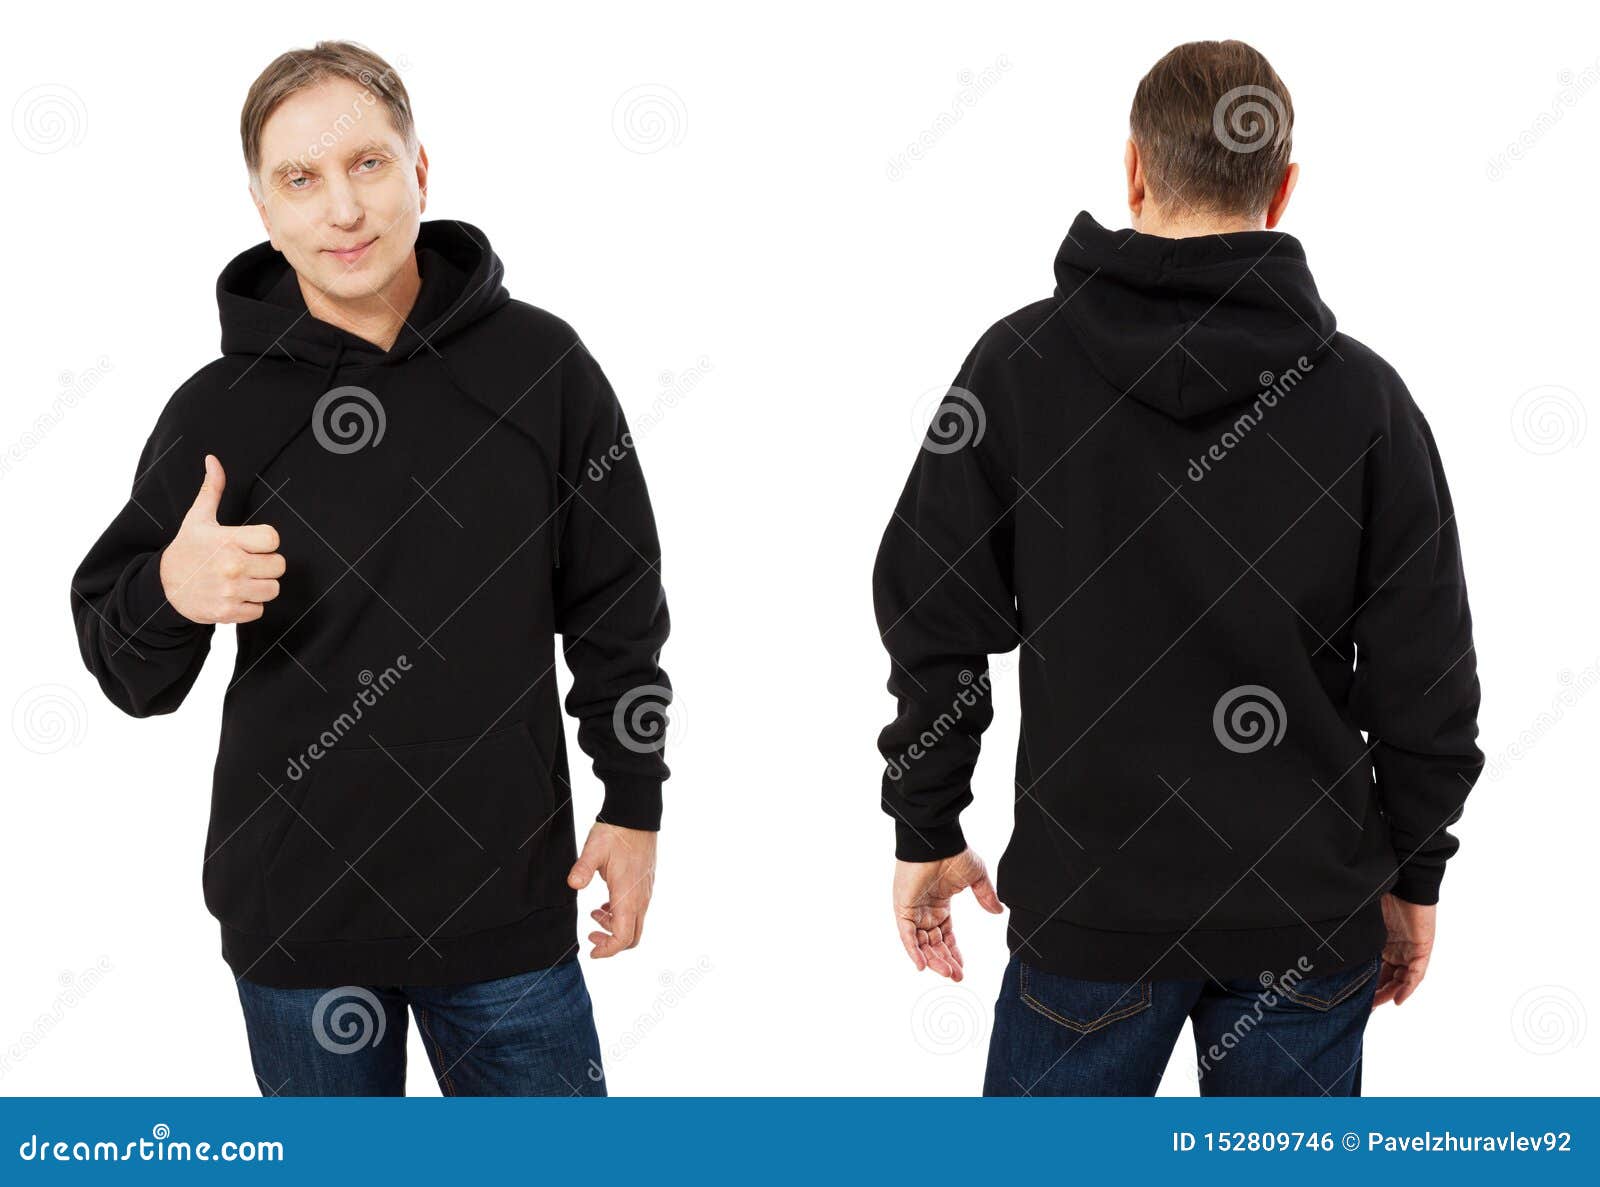 Download Middle Age Man In Black Sweatshirt Template Isolated. Male ...